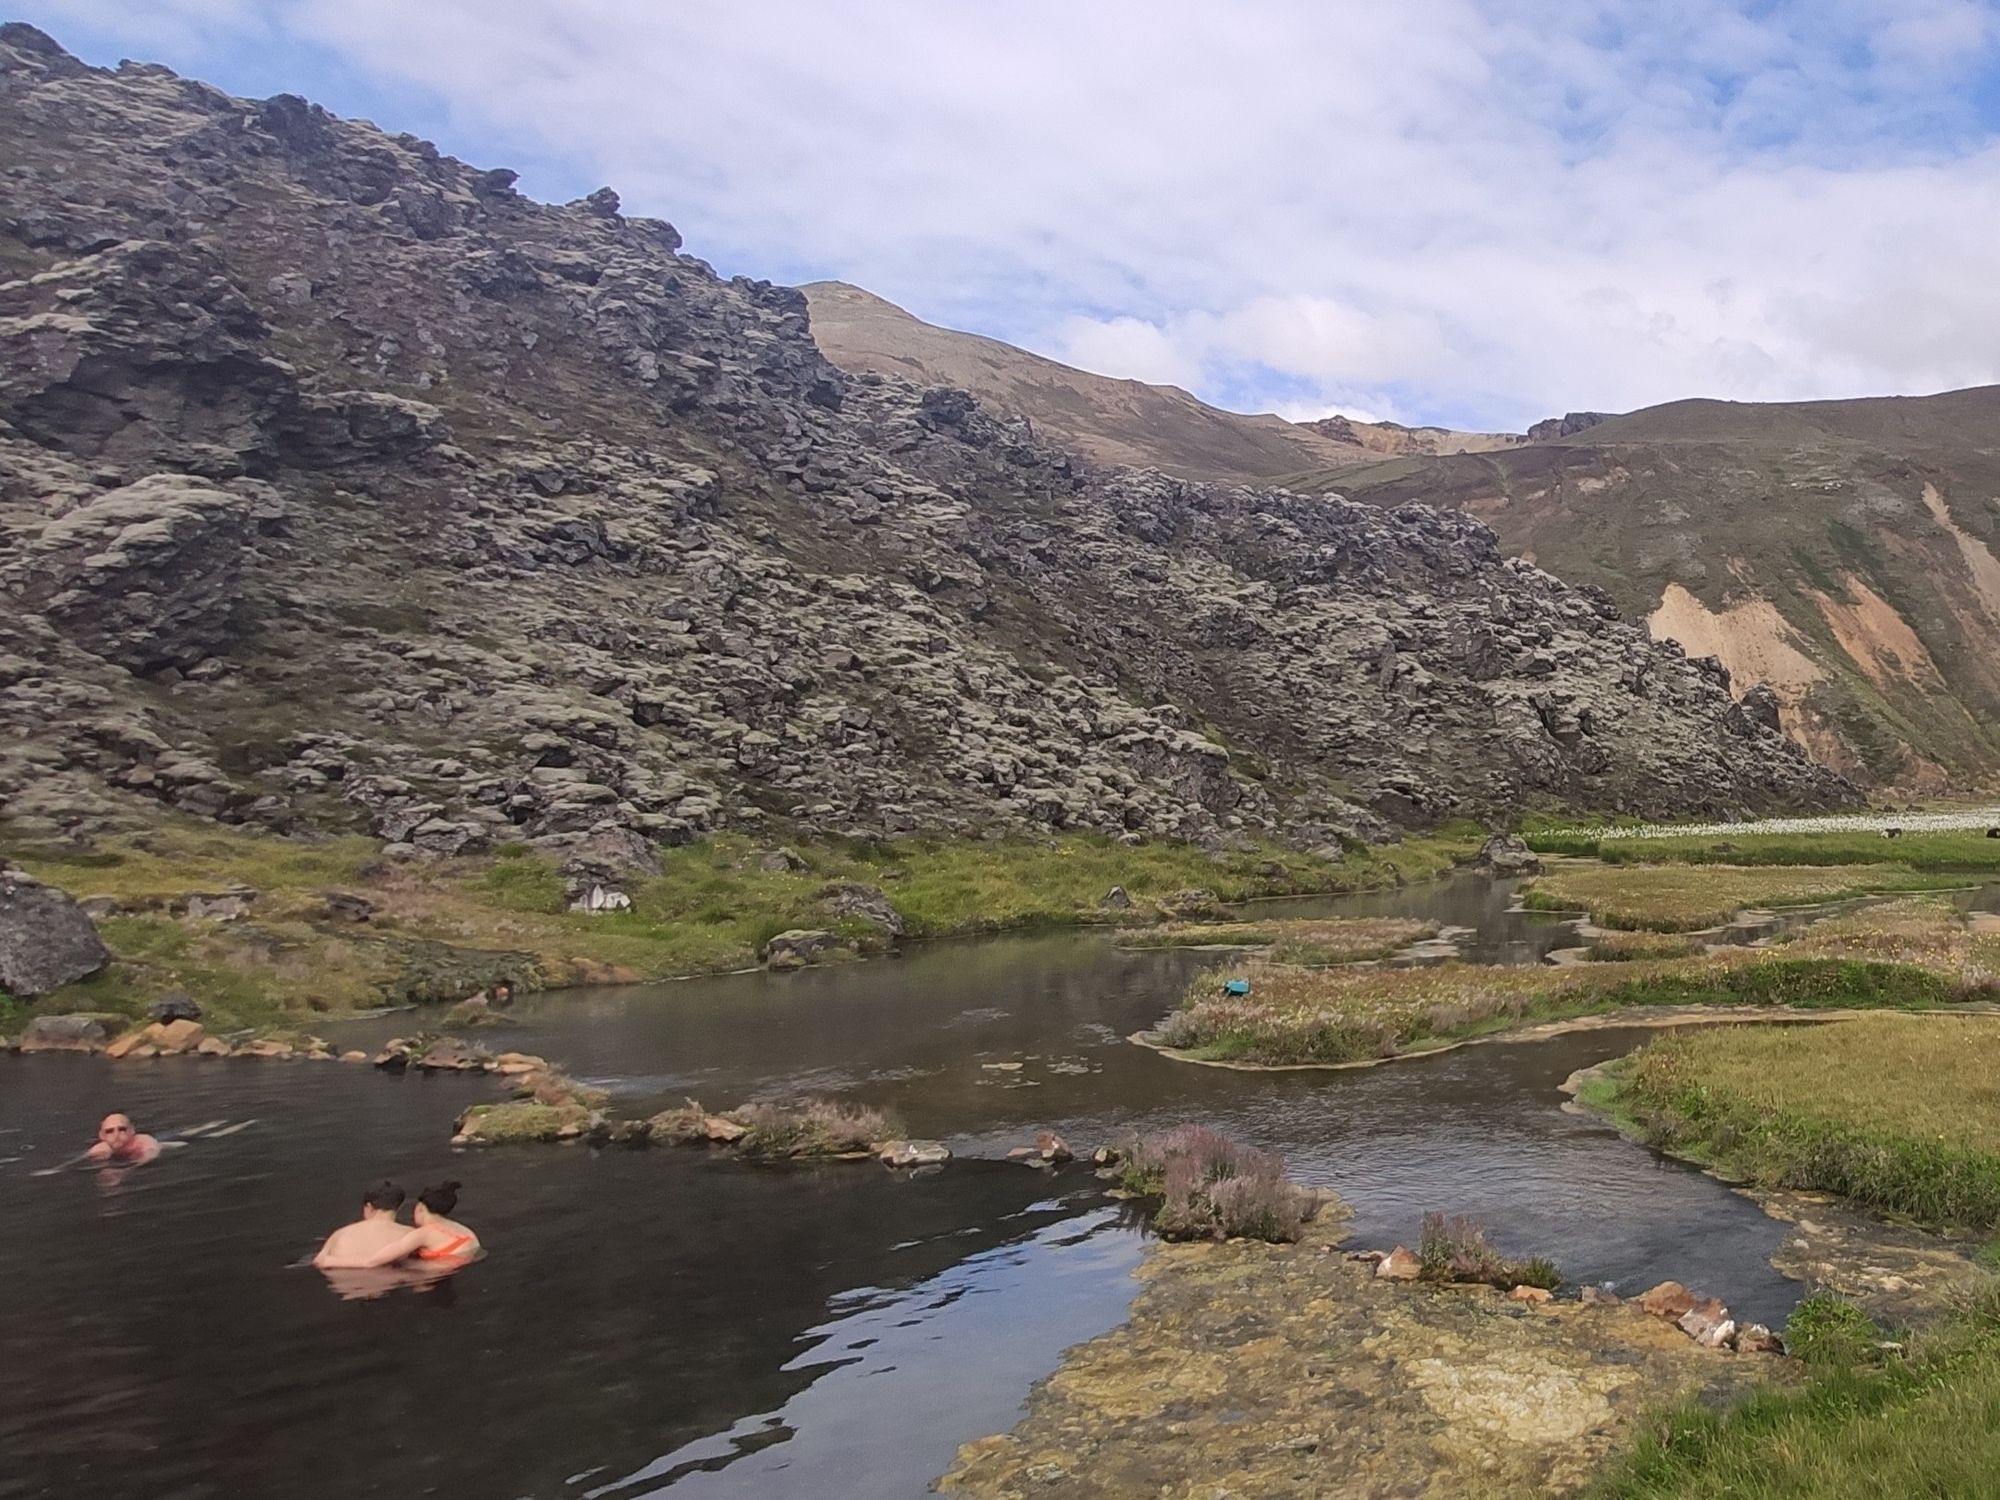 Swimmers in a geothermal pool in the hills of Iceland.